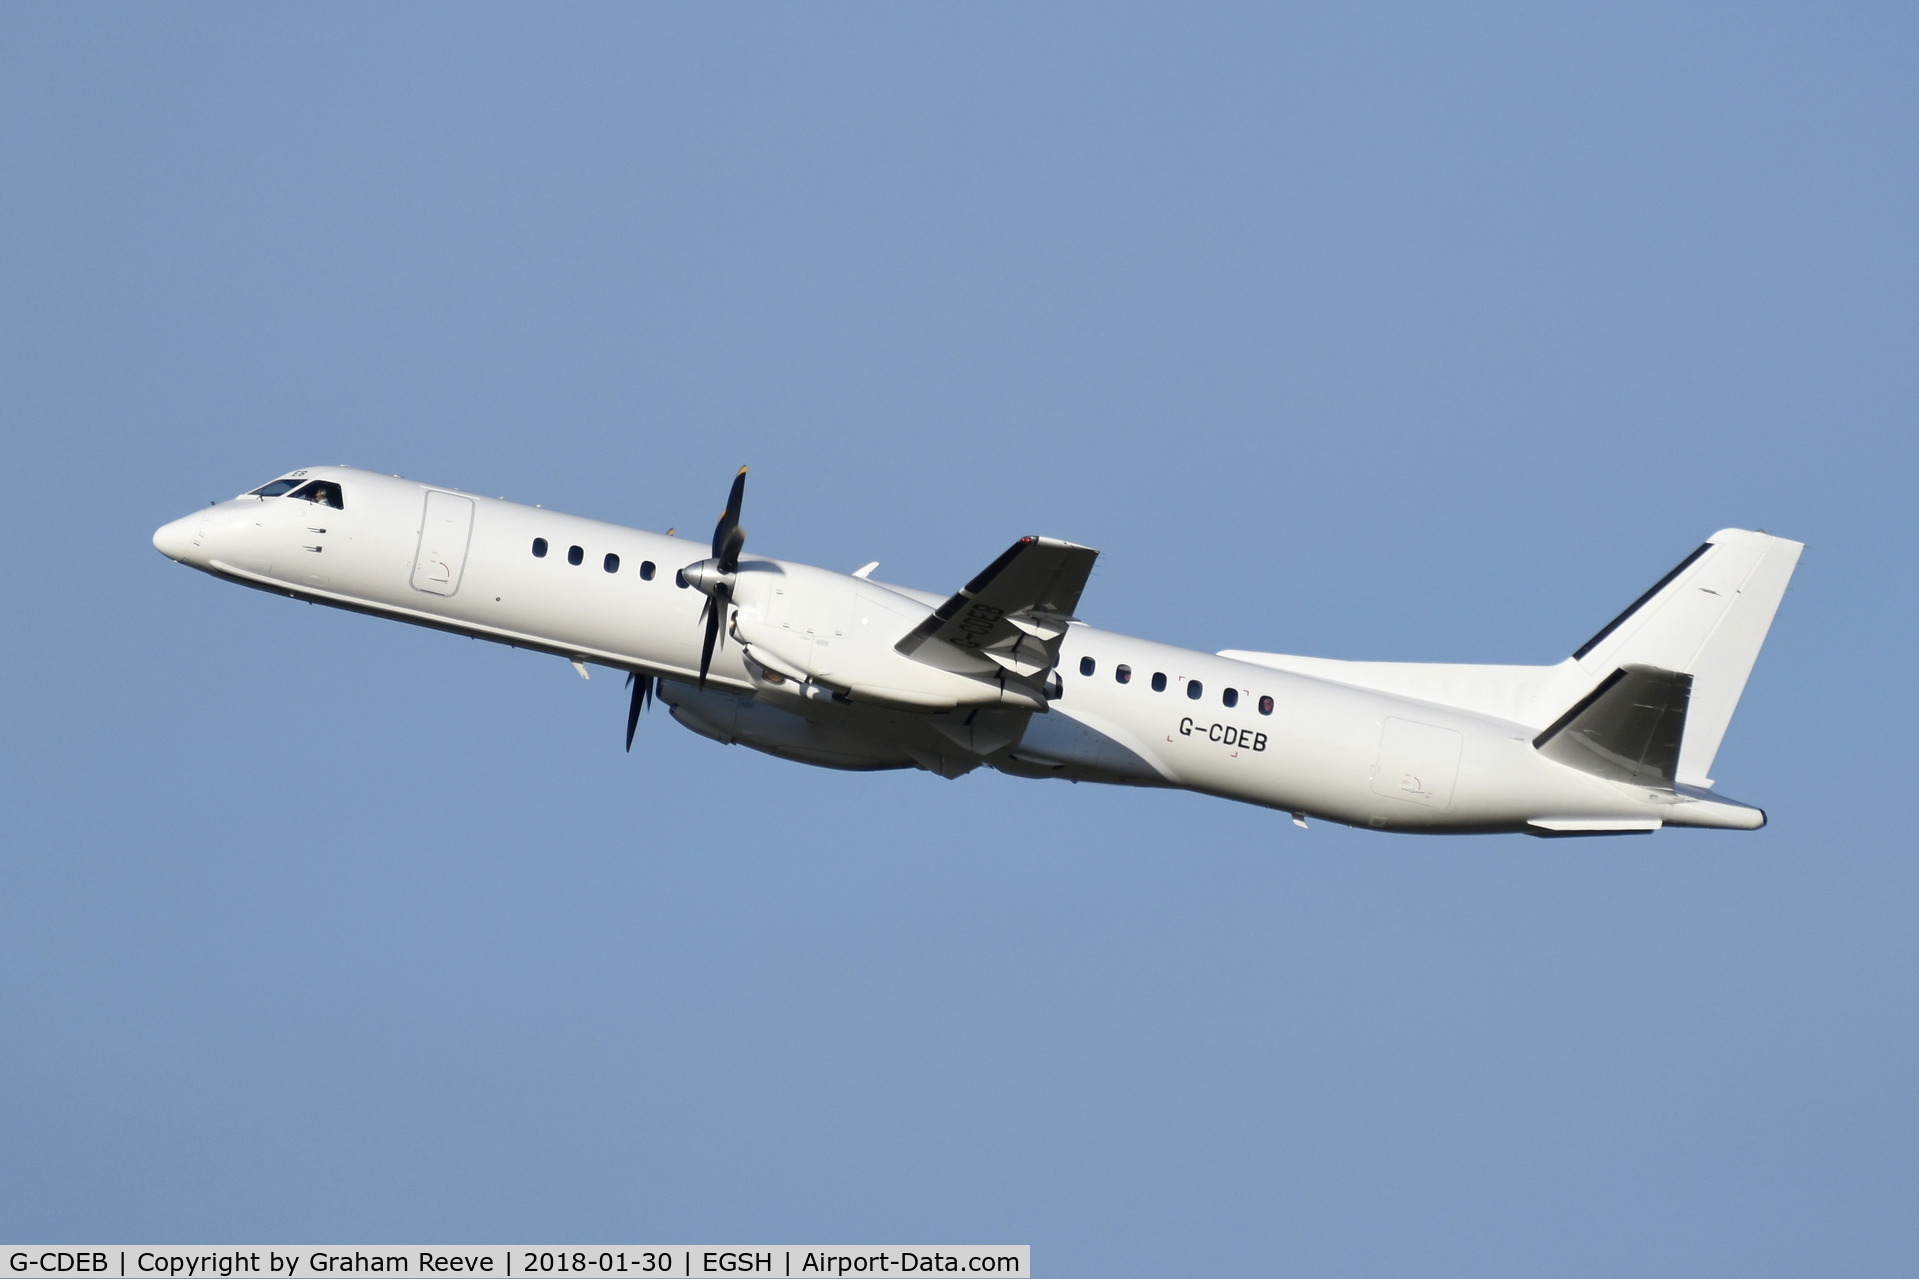 G-CDEB, 1996 Saab 2000 C/N 2000-036, Departing from Norwich.